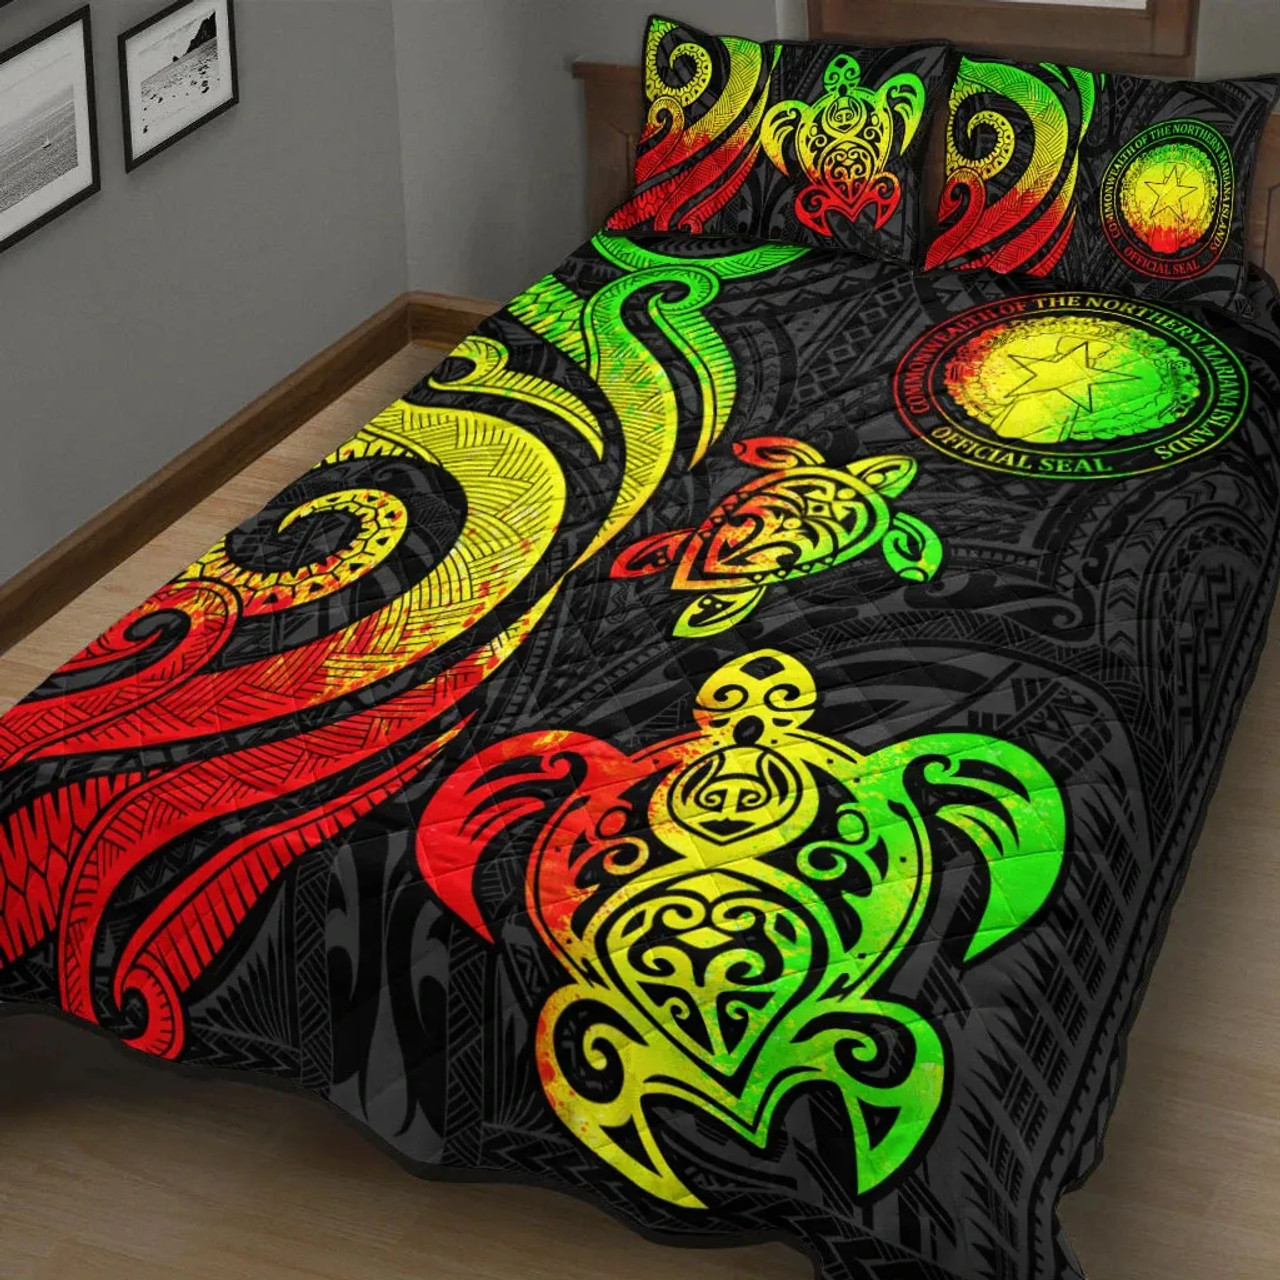 Northern Mariana Islands Quilt Bed Set - Reggae Tentacle Turtle 4